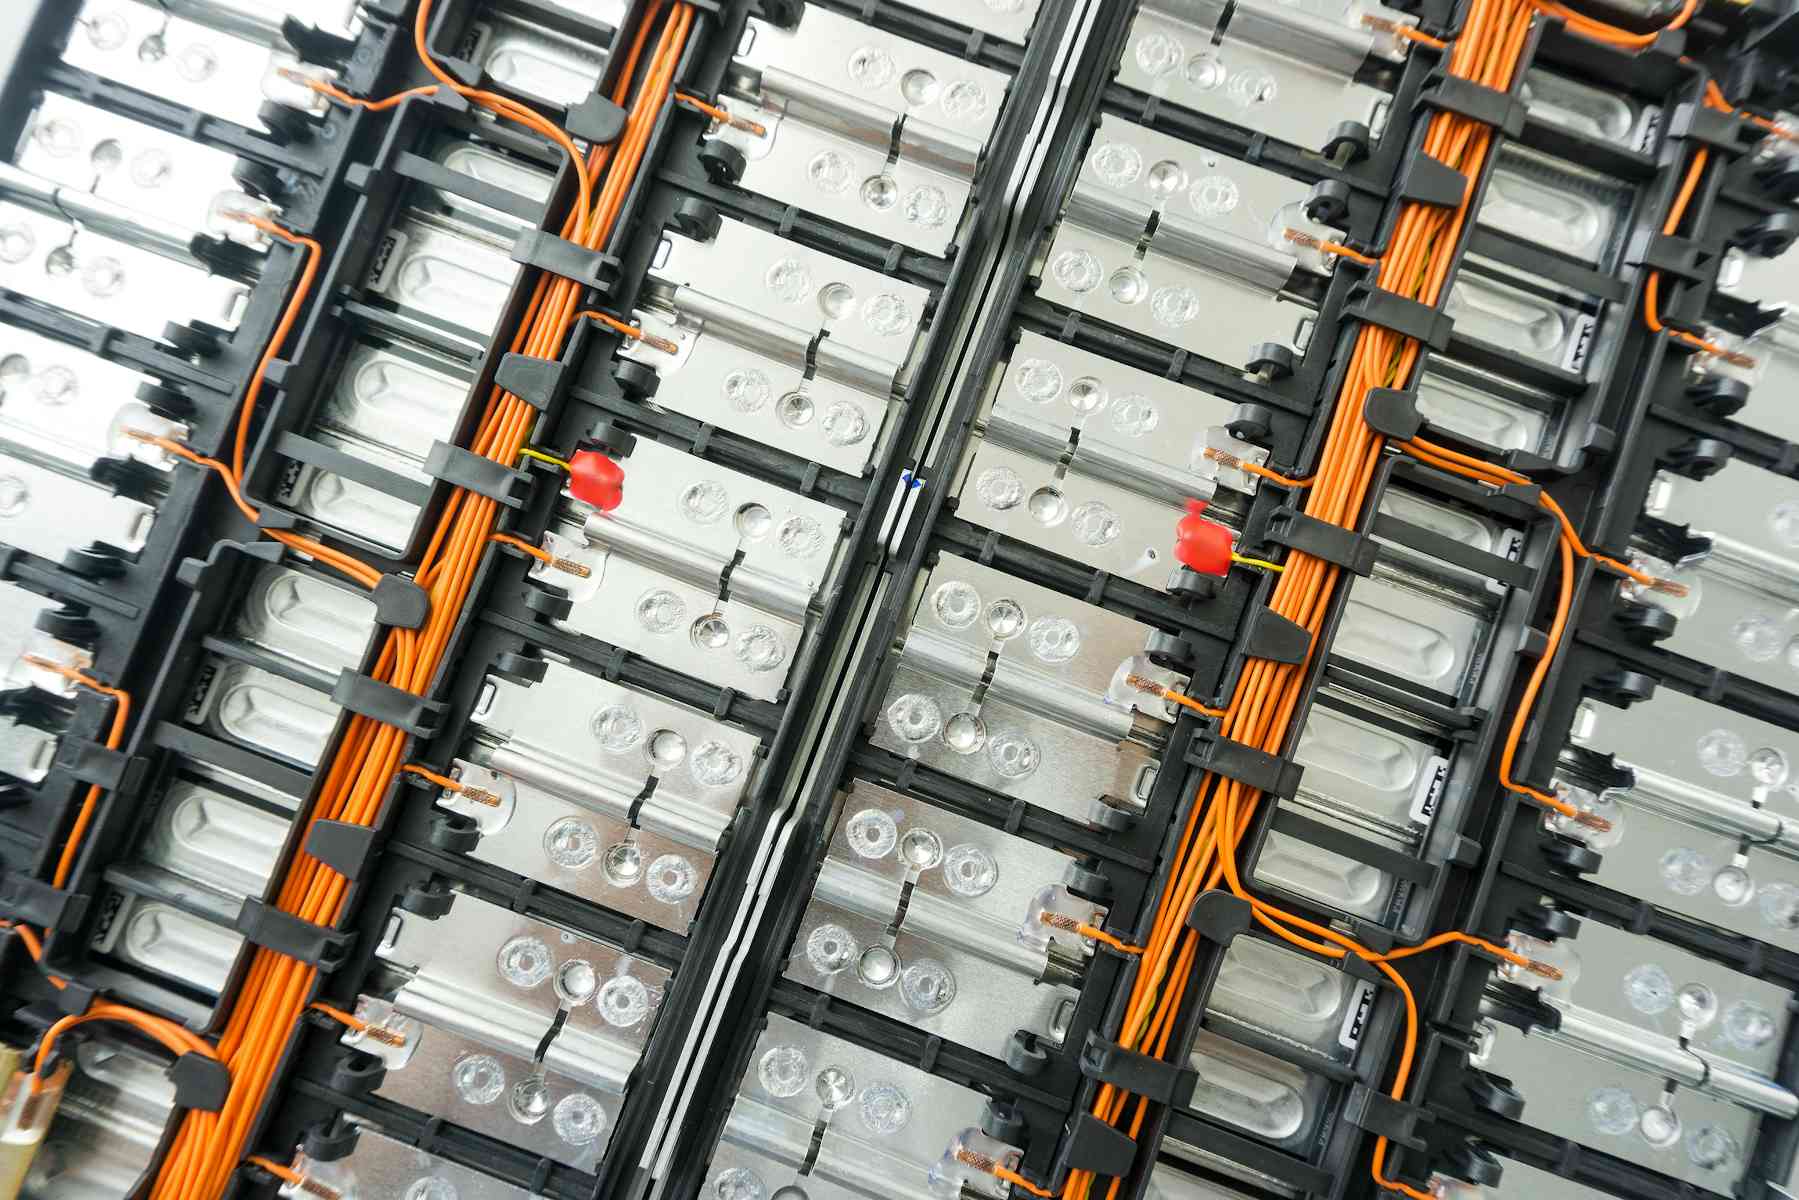 Electric vehicle batteries what will they look like in the future?